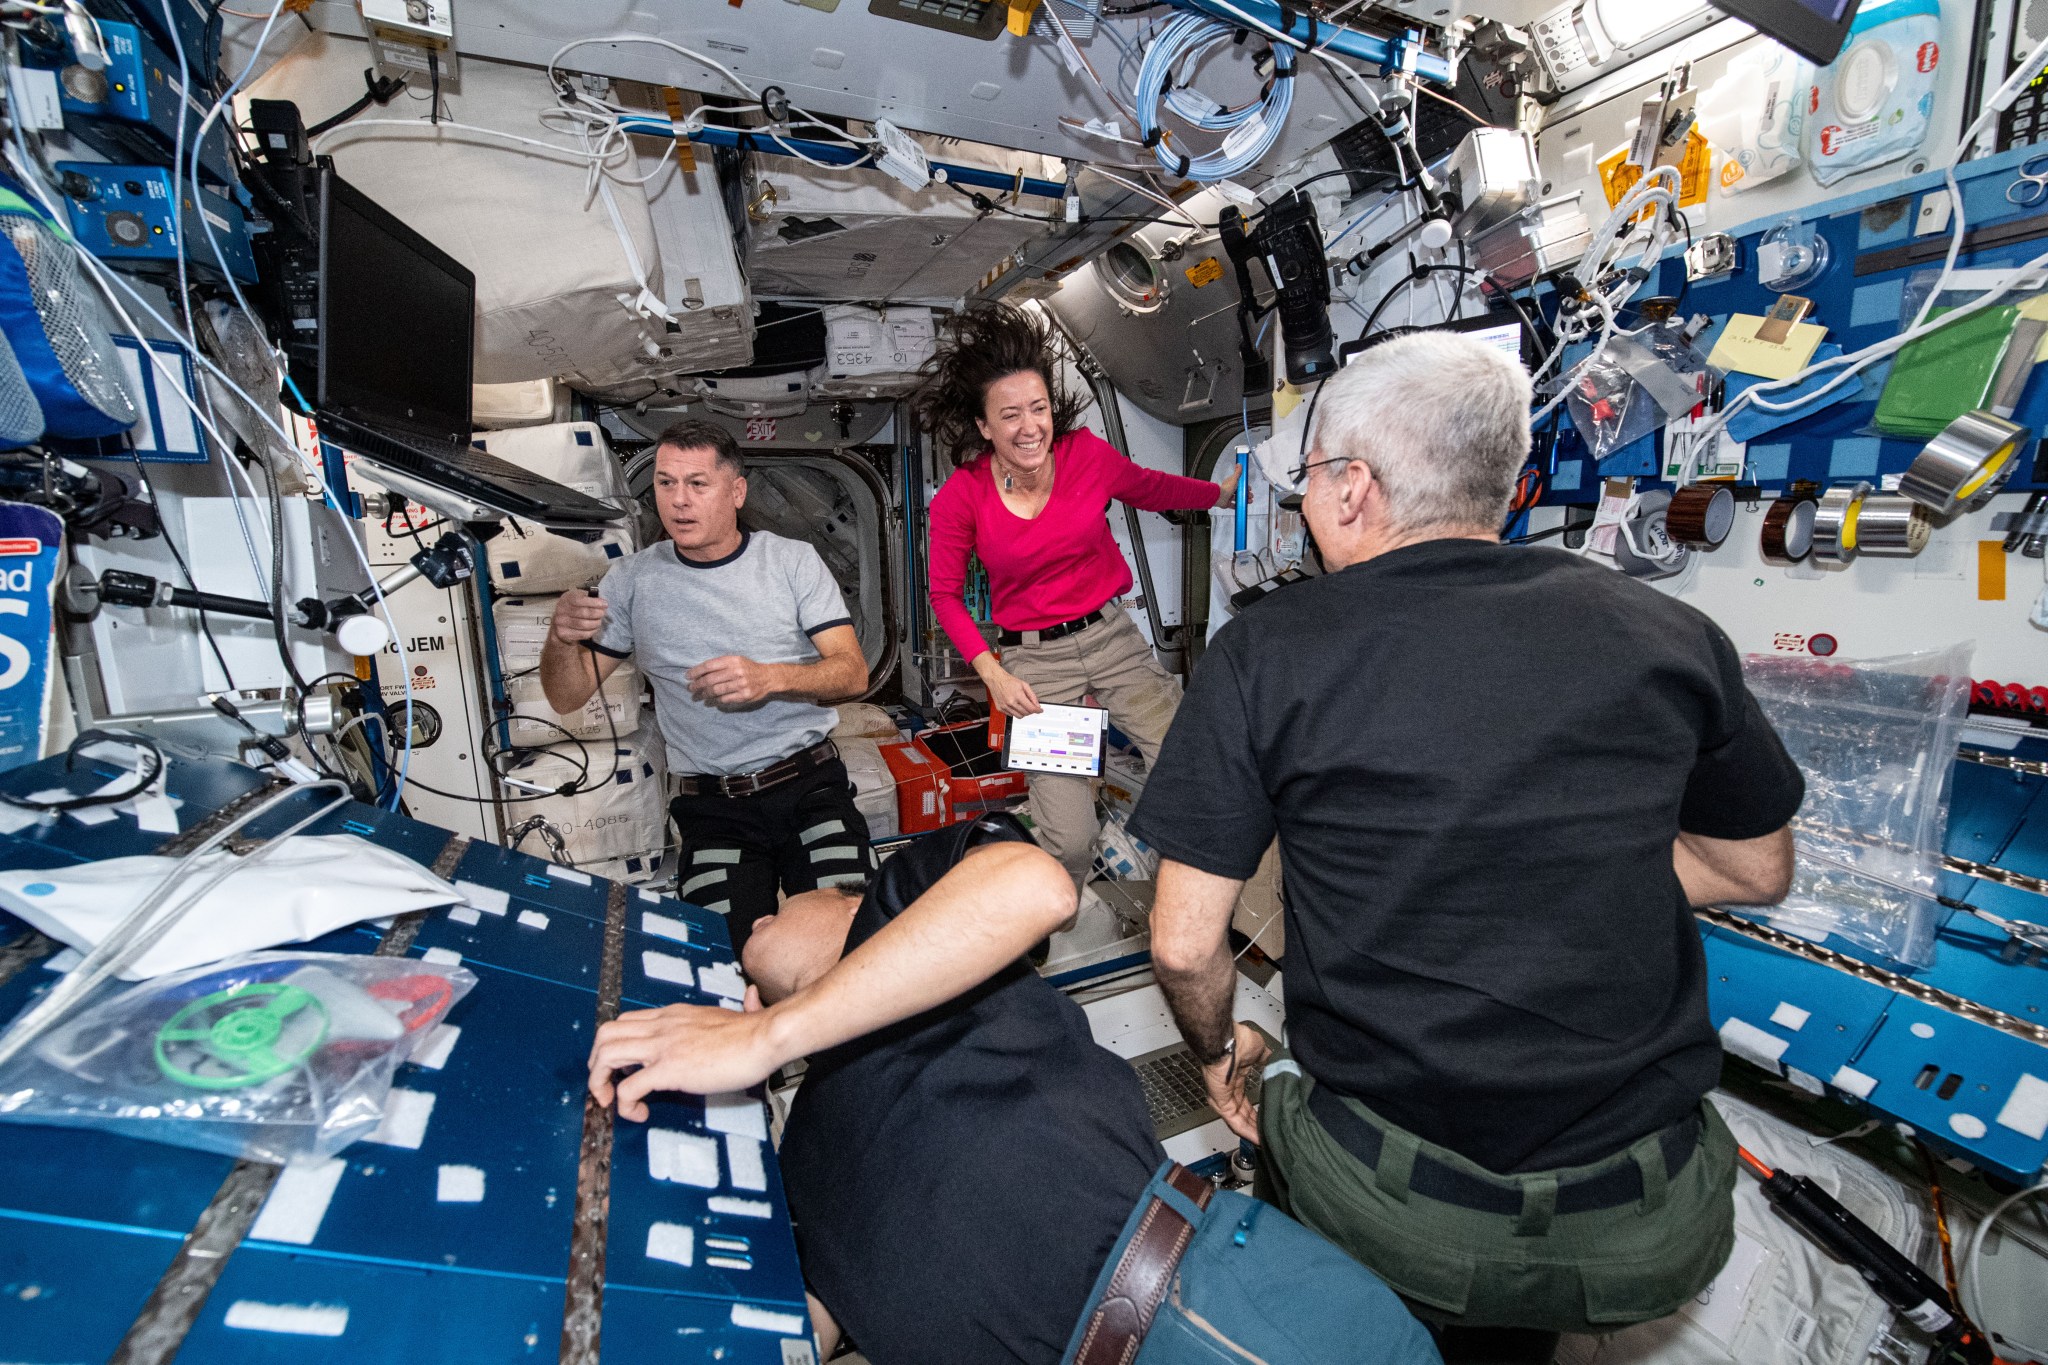 Expedition 65 astronauts (clockwise from left) Shane Kimbrough, Megan McArthur, Mark Vande Hei and Akihiko Hoshide are pictured inside the International Space Station's Harmony module.